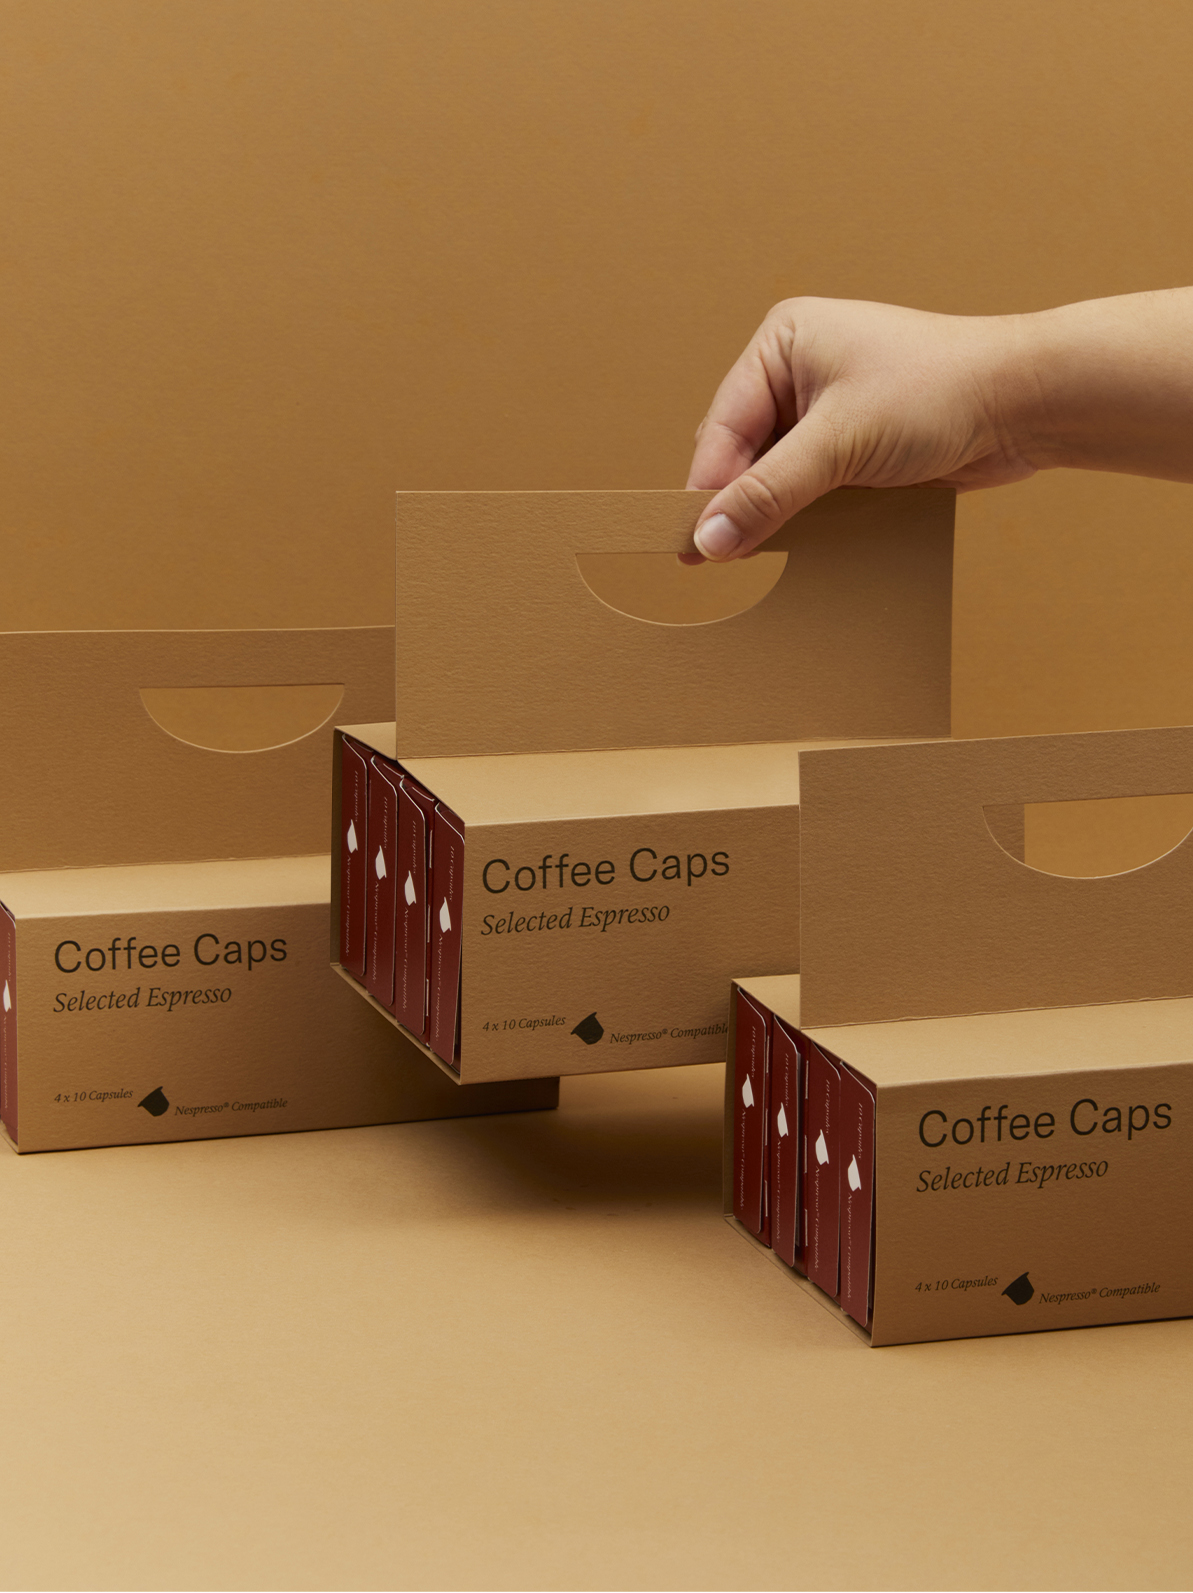 Assembly Coffee is Introducing the Assembly Coffee Caps – Selected Espresso